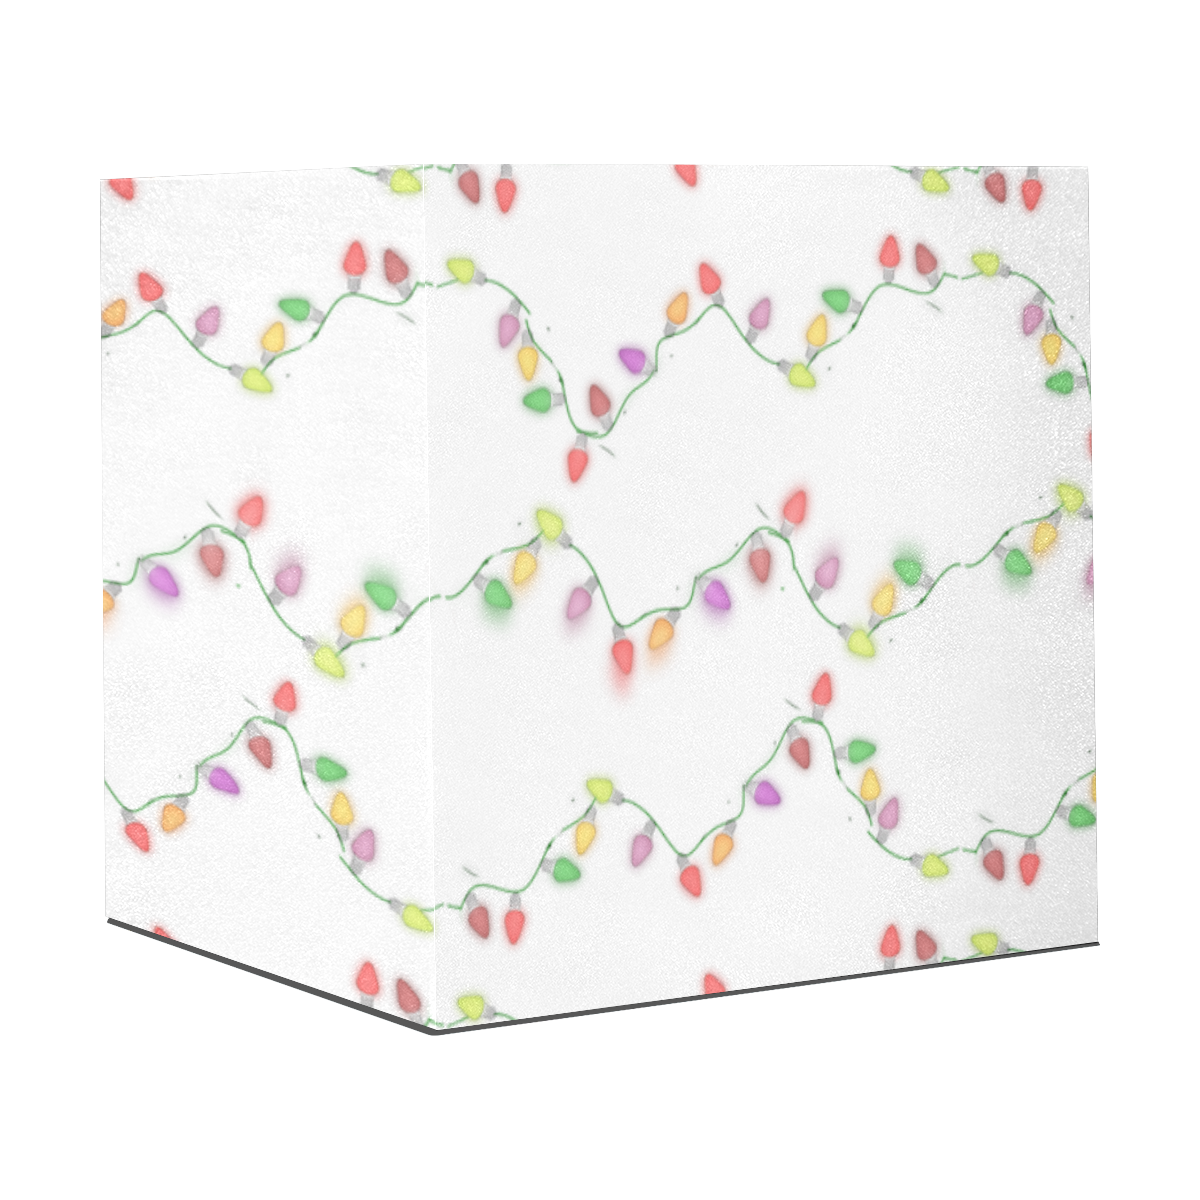 Festive Christmas Lights on White Gift Wrapping Paper 58"x 23" (5 Rolls)